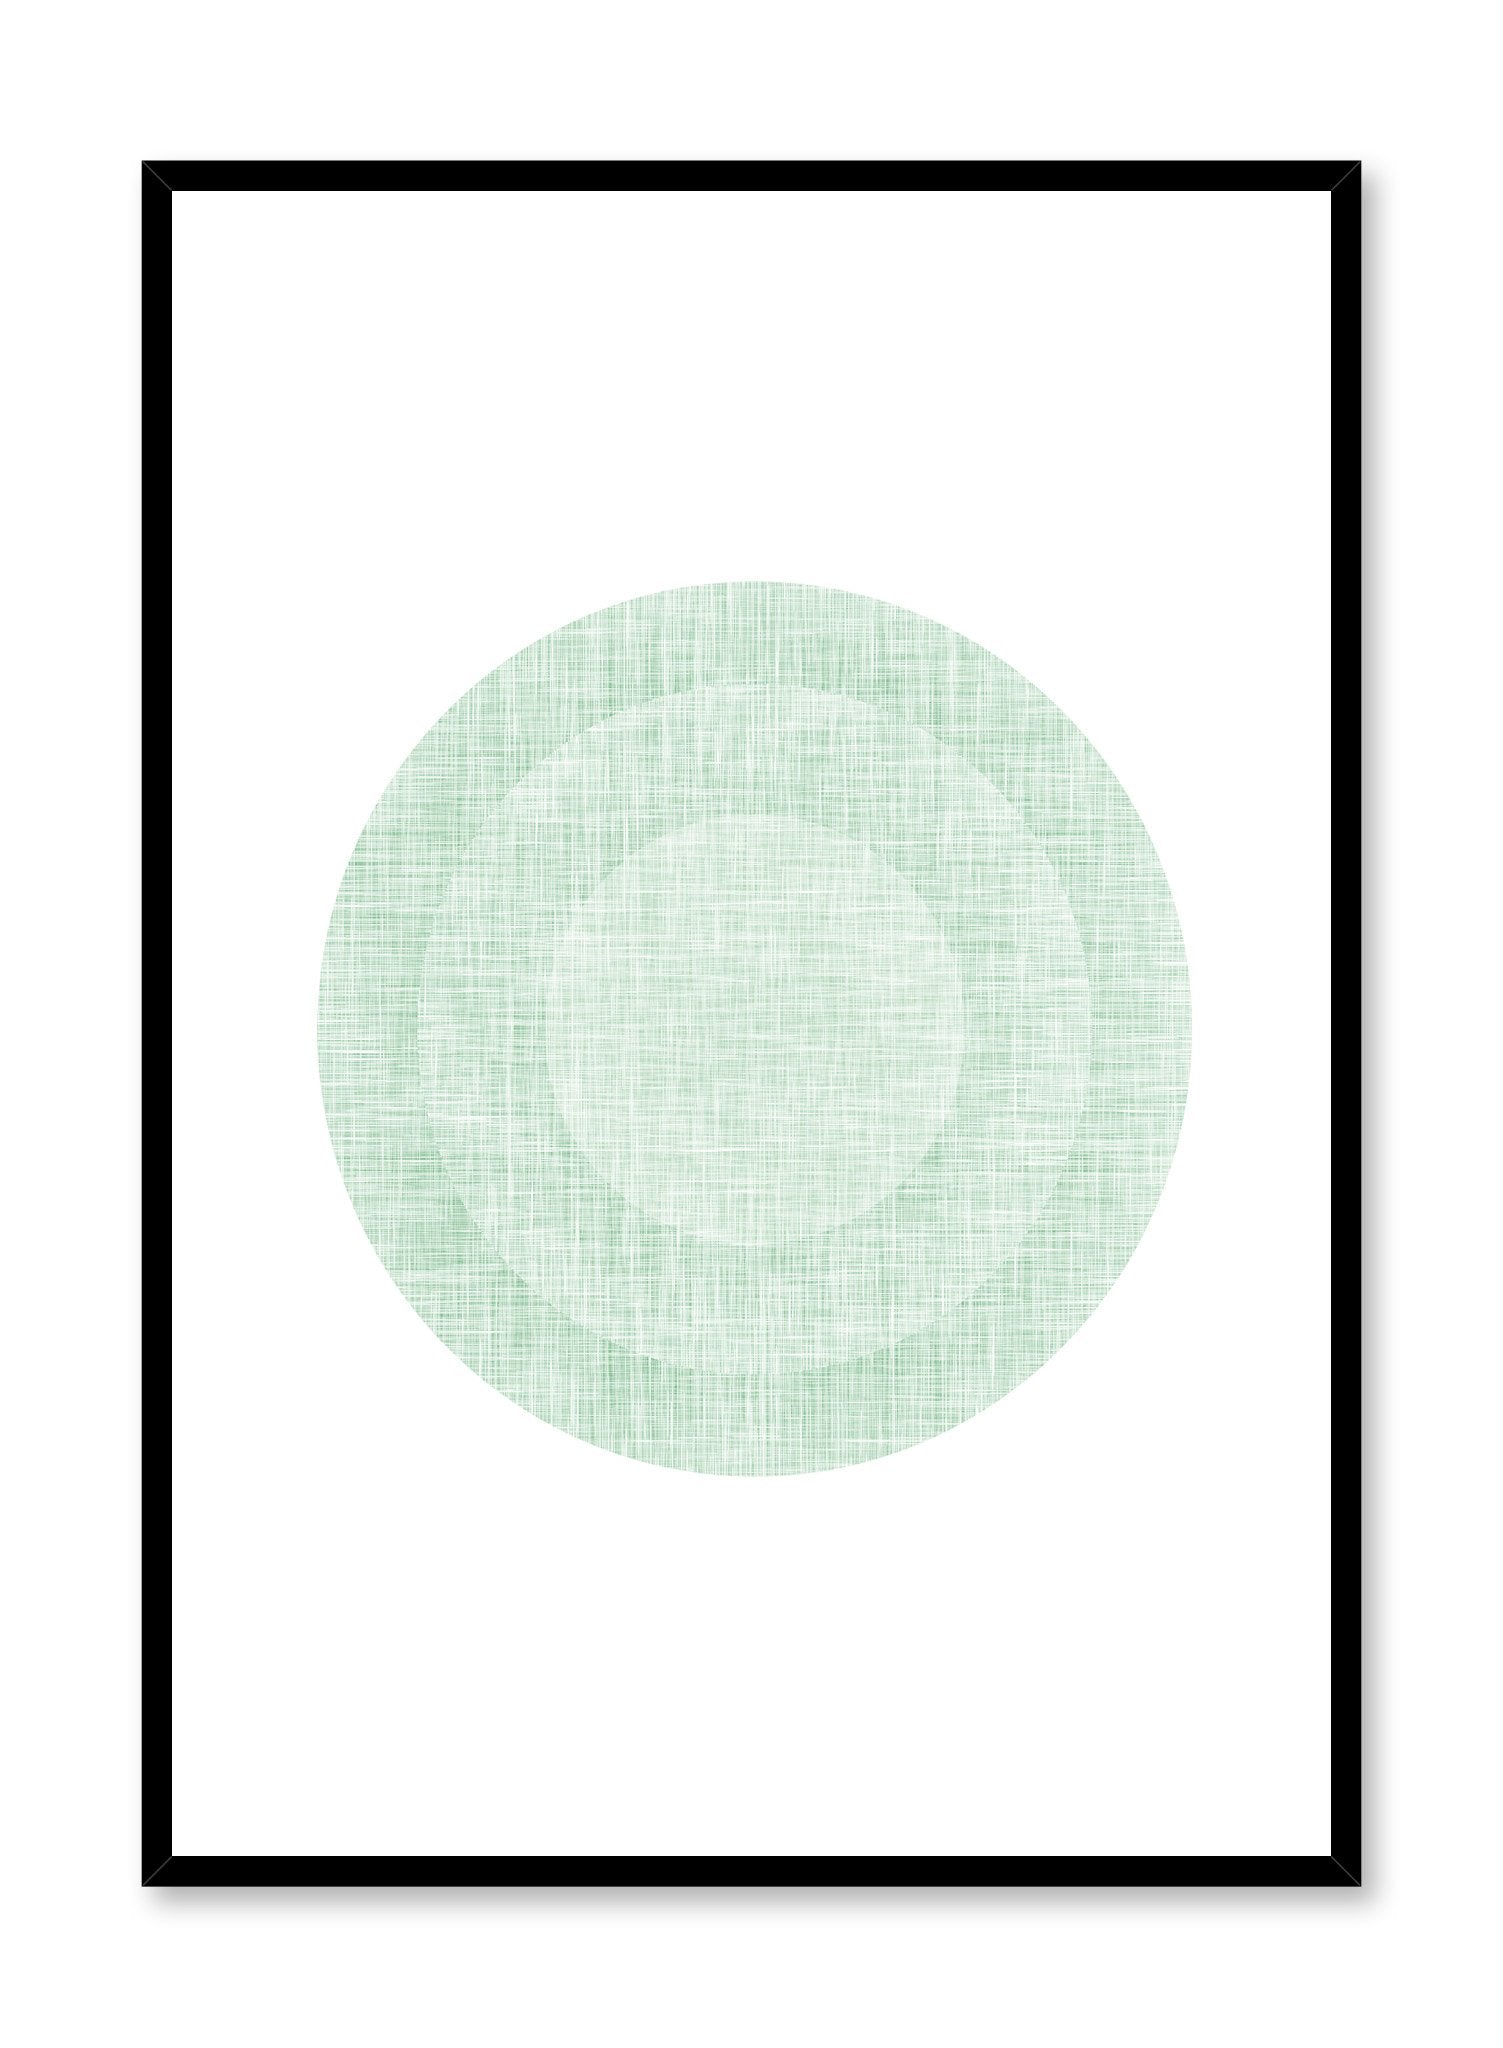 Minimalist design poster by Opposite Wall with abstract green circles in target shape